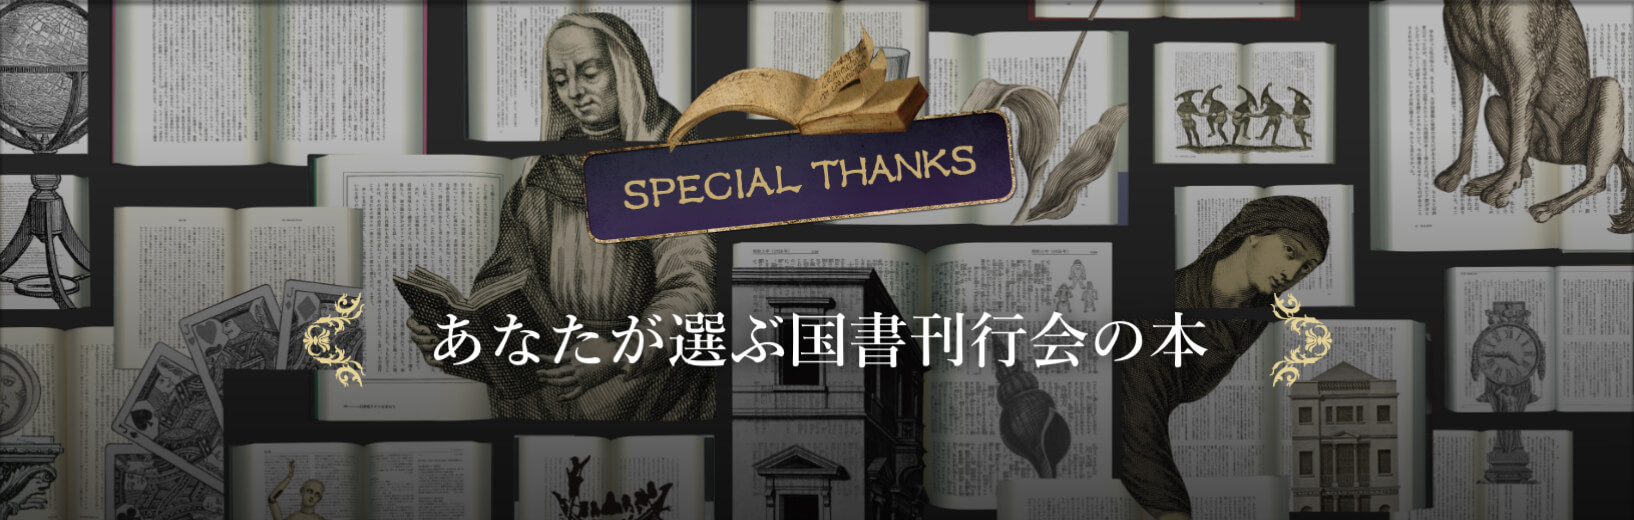 SPECIAL THANKS あなたが選ぶ国書刊行会の本